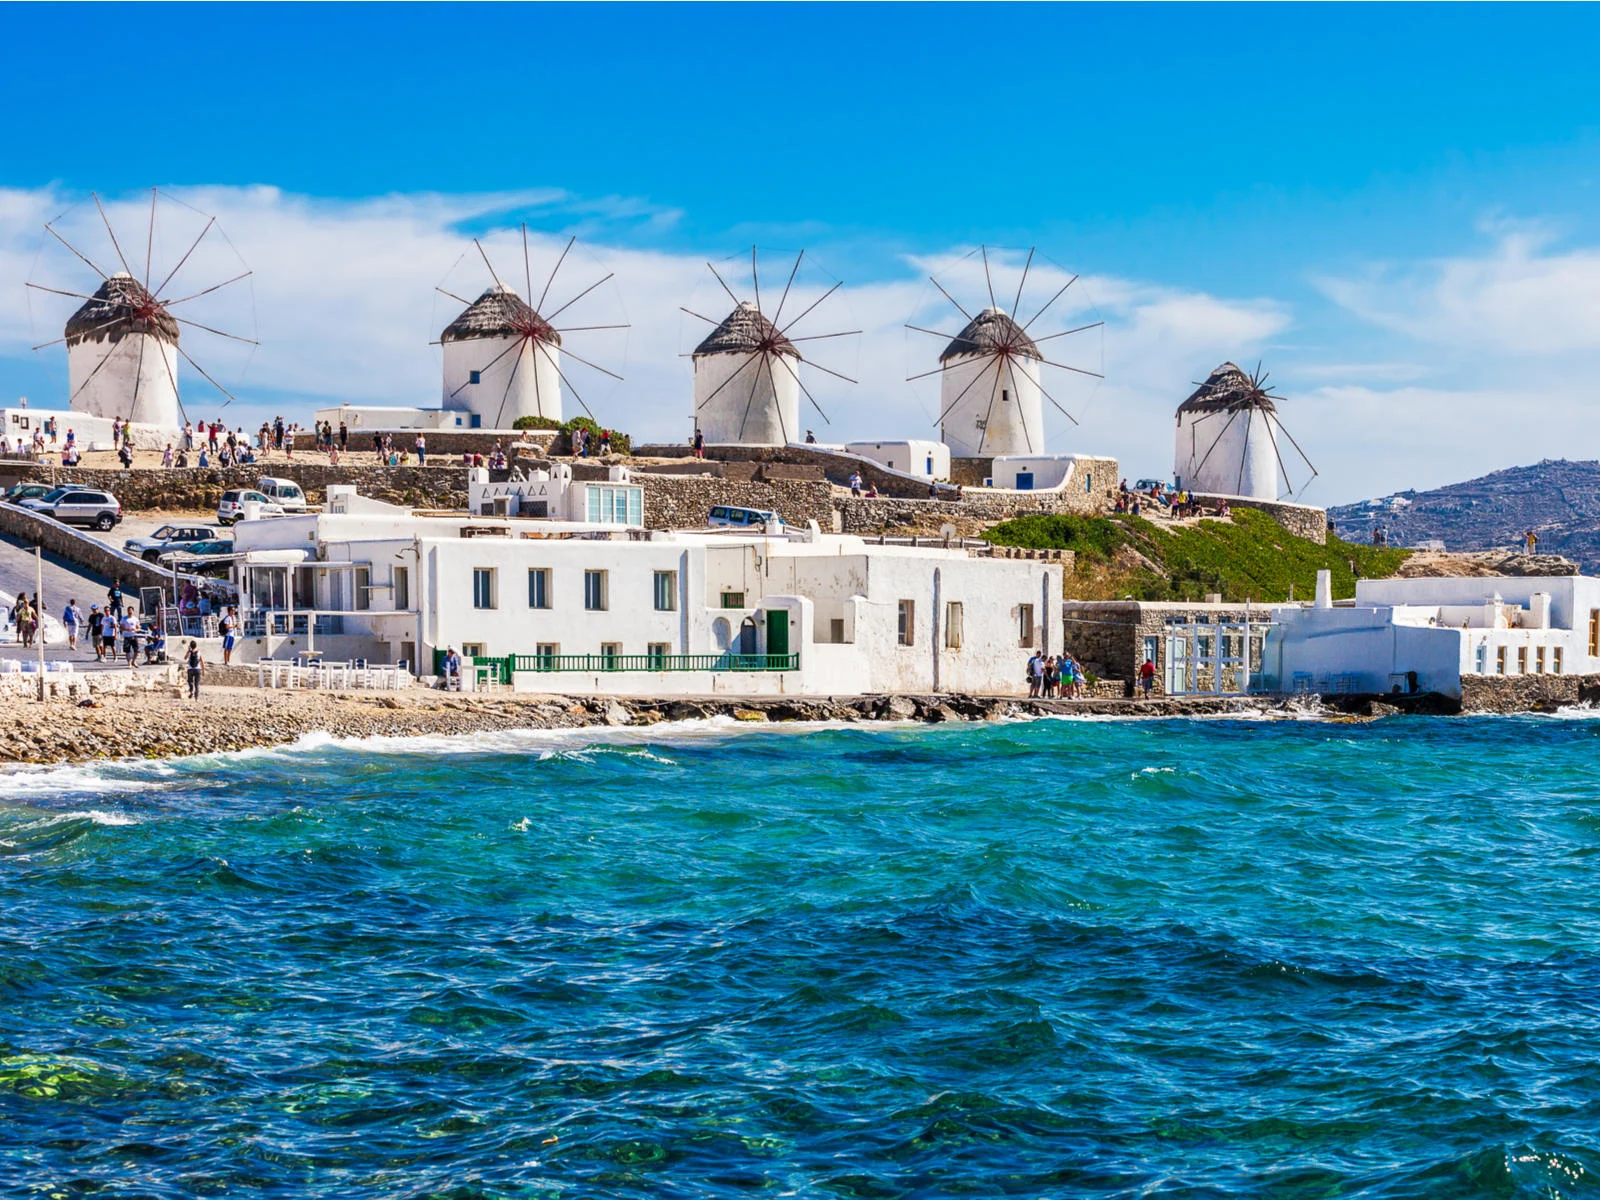 Tourists gathered around the five iconic white windmills at Mykonos, photographed from the the wavy blue see as a piece on the best islands in Greece to visit